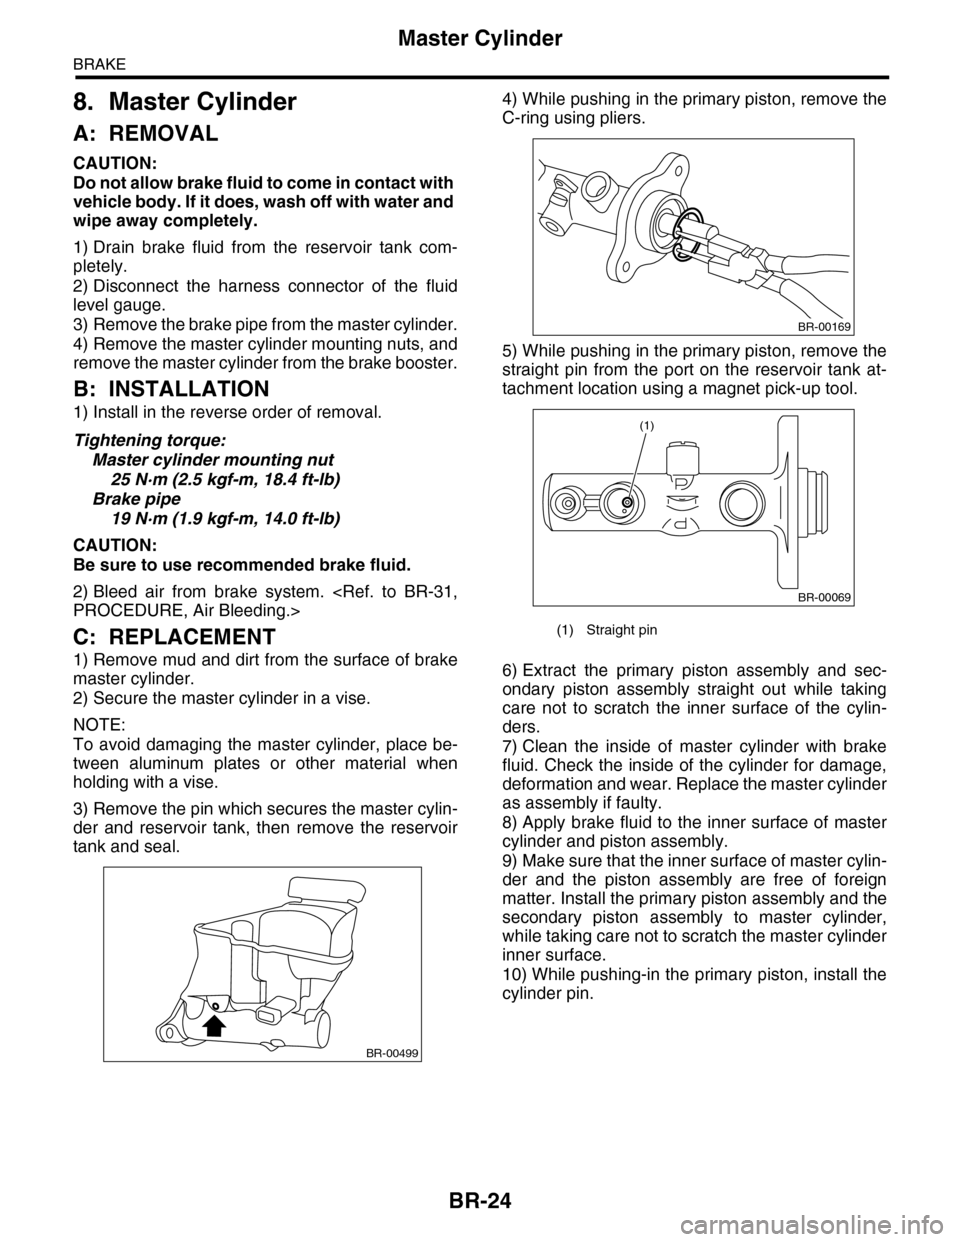 SUBARU TRIBECA 2009 1.G Service Workshop Manual BR-24
Master Cylinder
BRAKE
8. Master Cylinder
A: REMOVAL
CAUTION:
Do not allow brake fluid to come in contact with 
vehicle body. If it does, wash off with water and 
wipe away completely.
1) Drain  